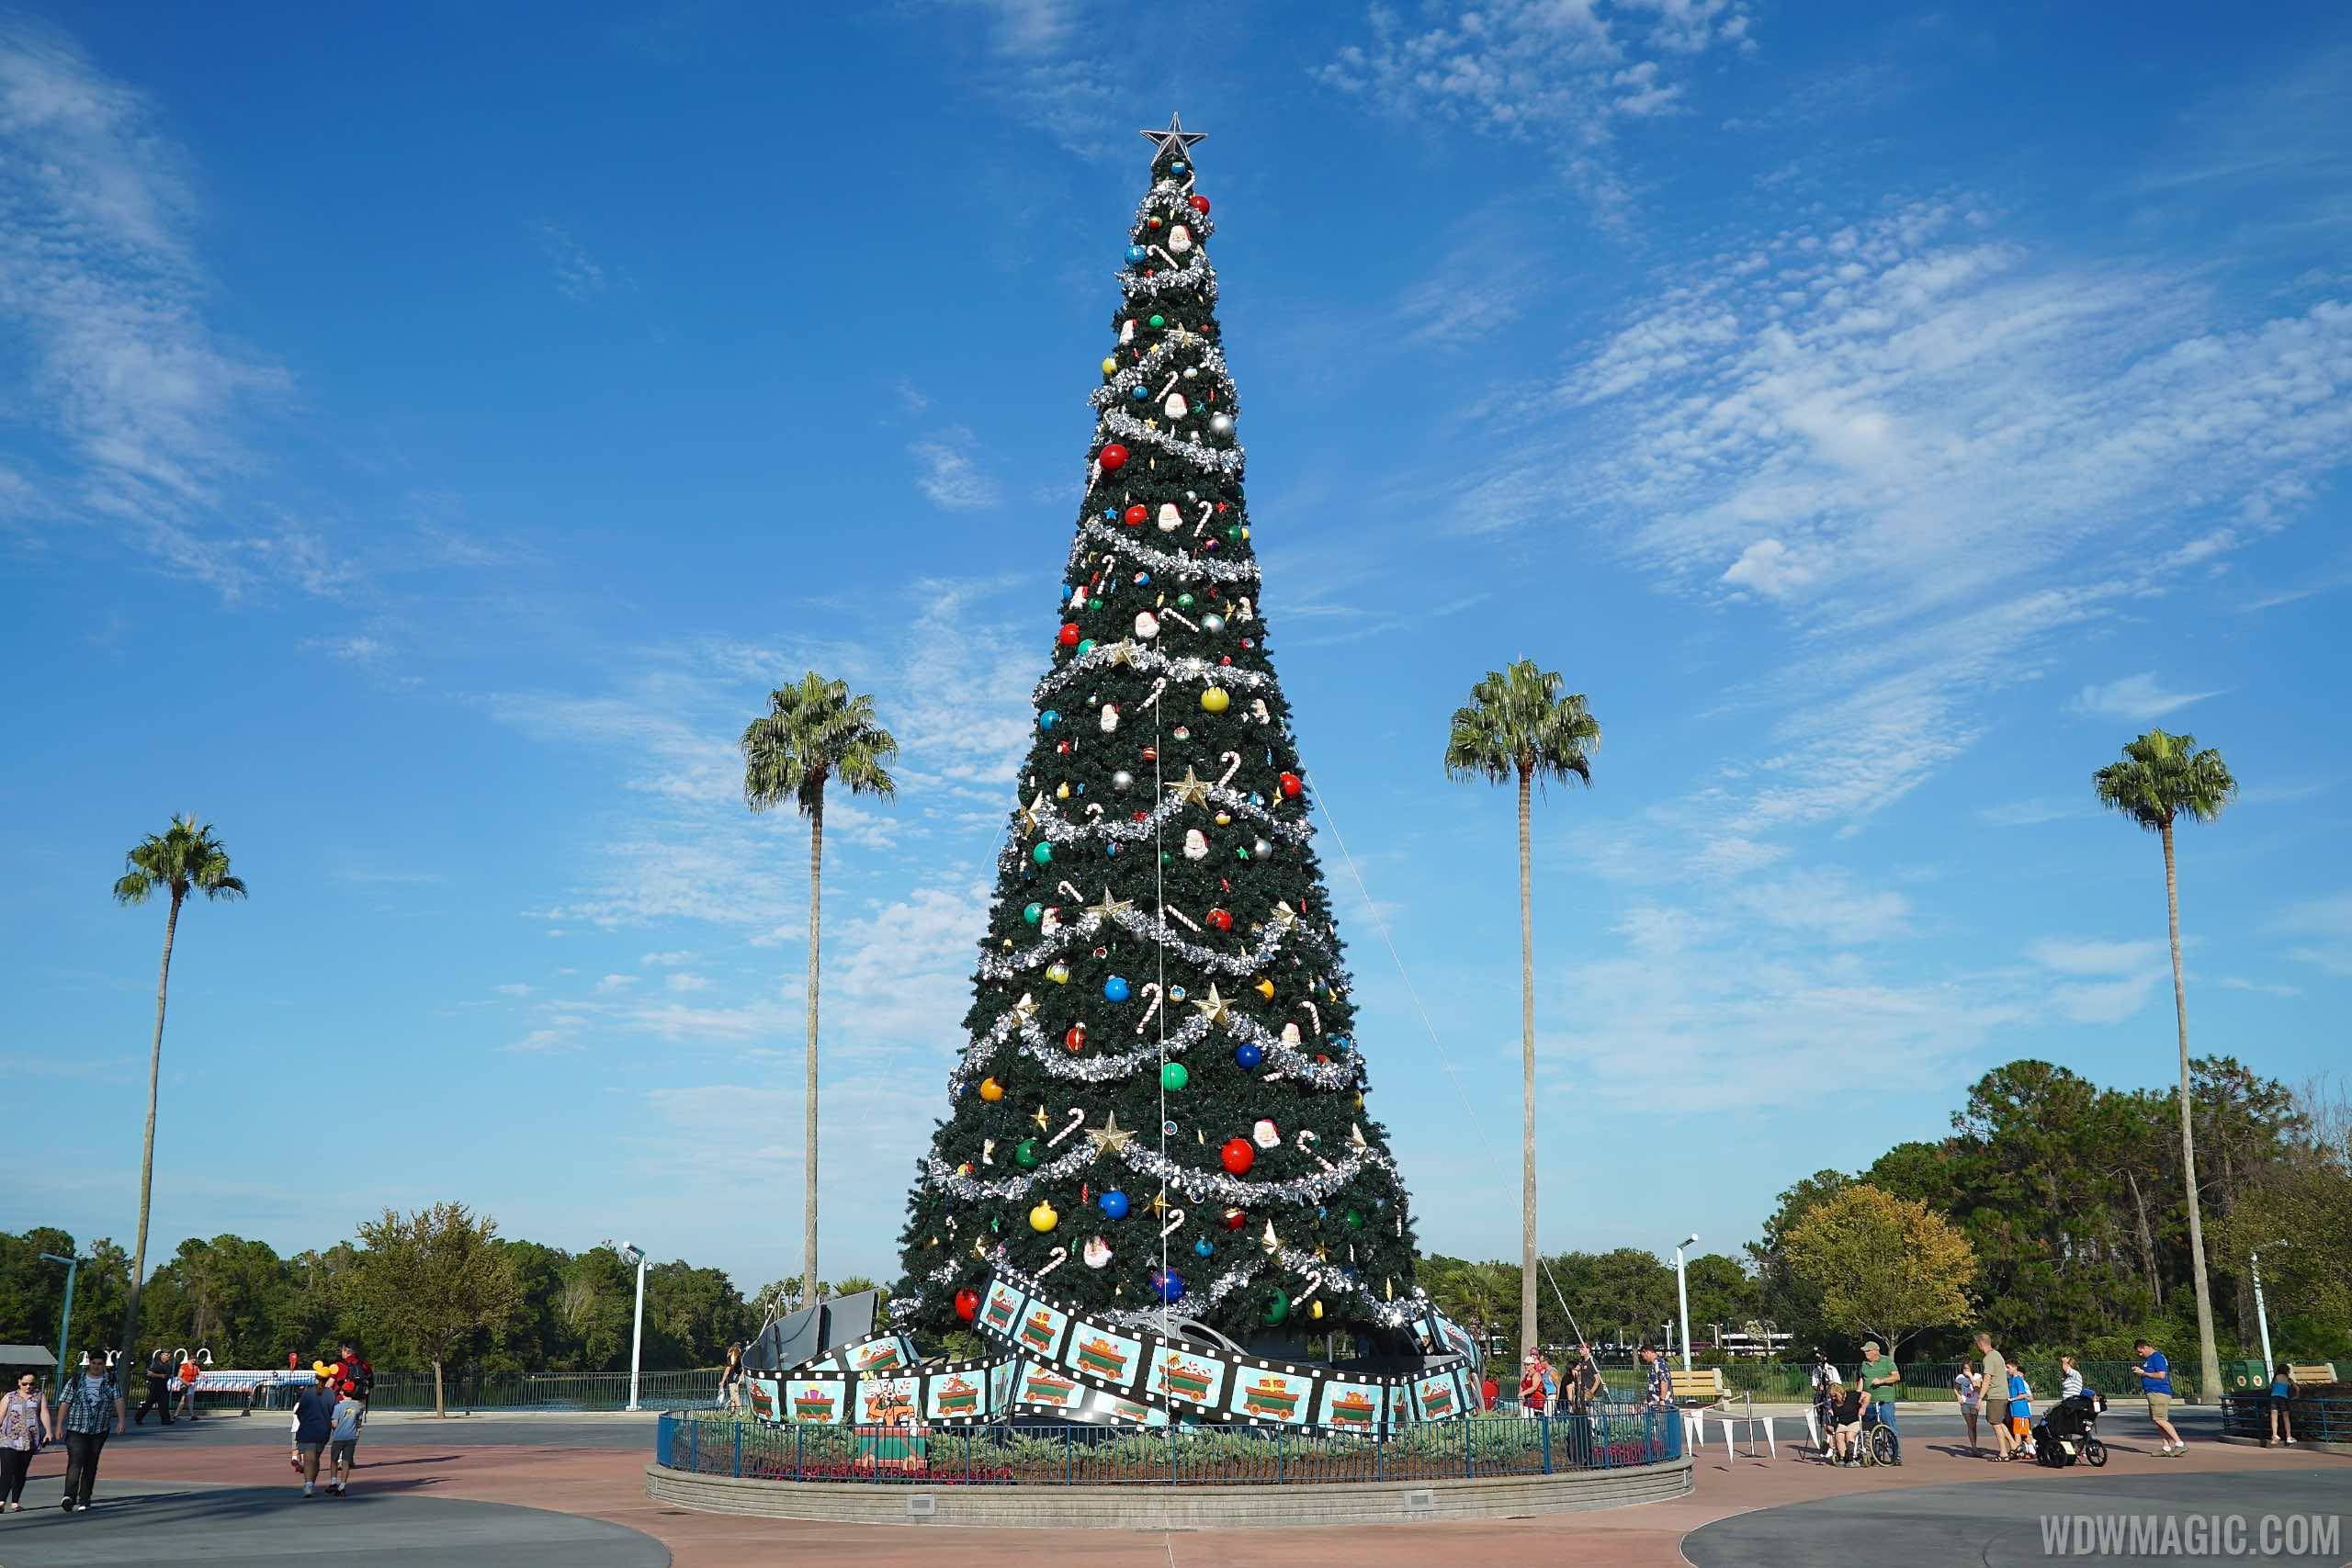 Jingle Bell, Jingle Bam and Sunset Seasons Greetings to continue at Disney's Hollywood Studios for 2019